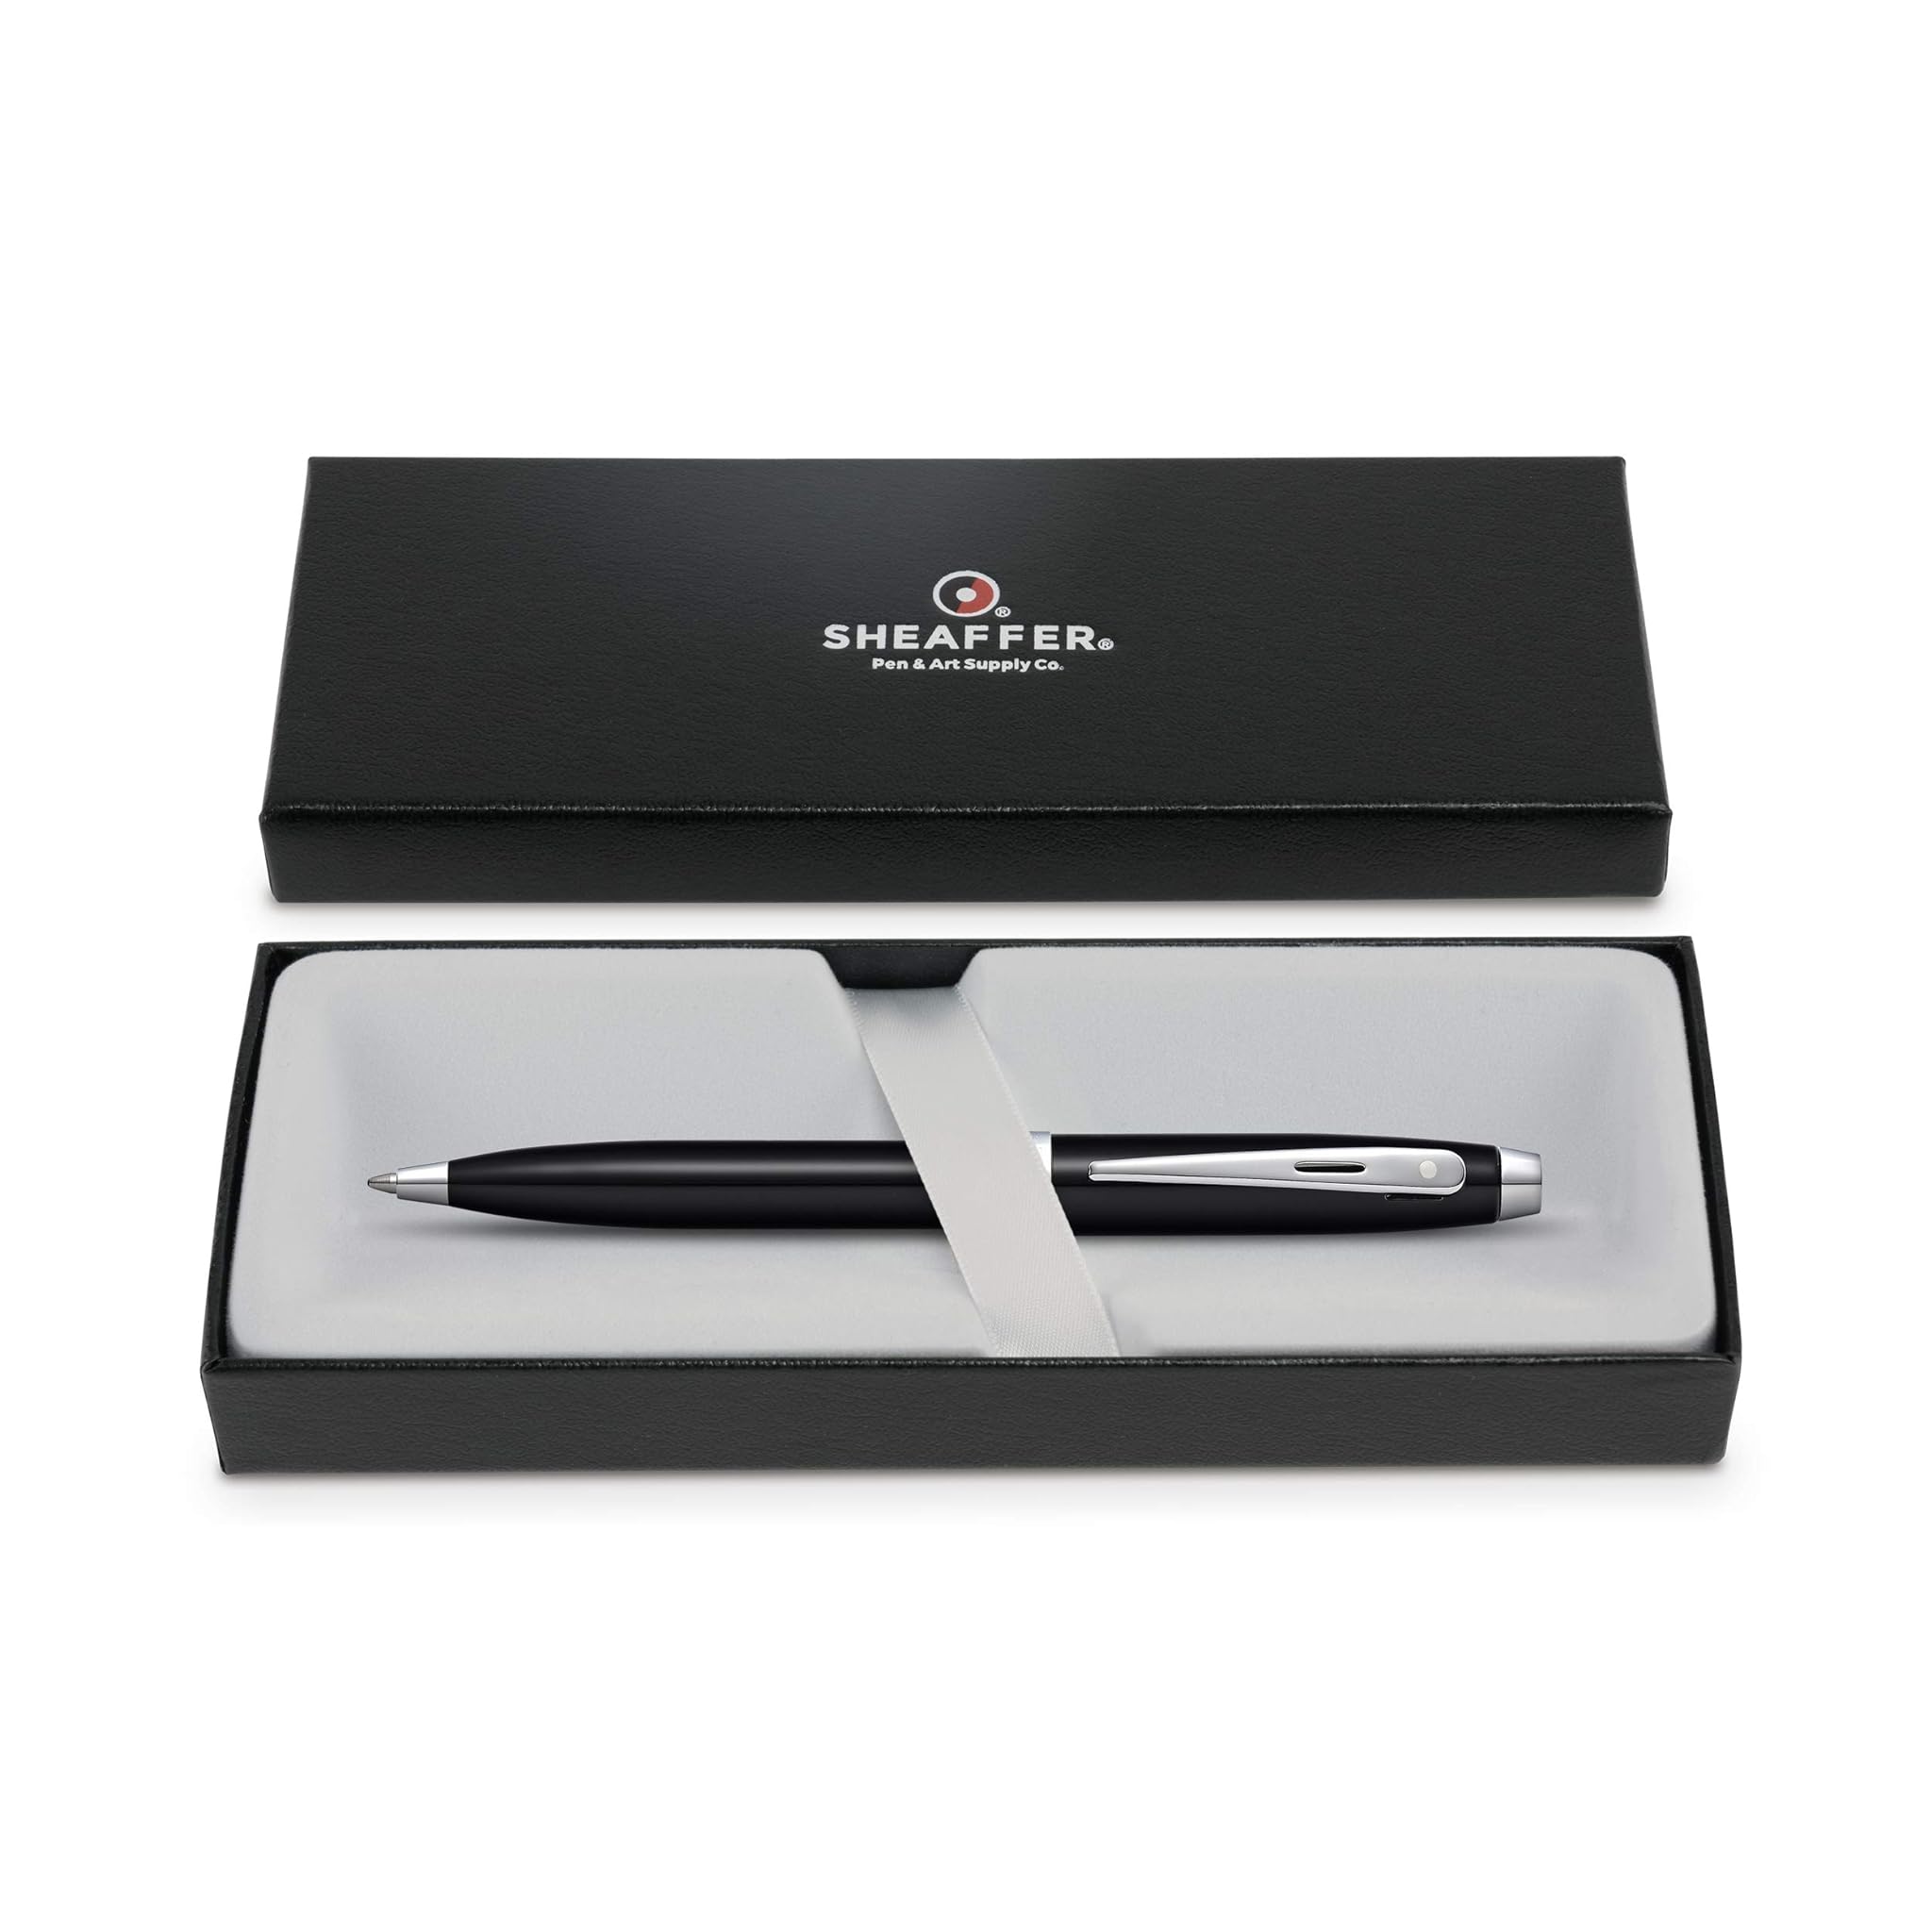 WP23896-PEN SHEAFFER GIFT 100 A 9338 - GLOSSY BLACK LACQUER WITH CHROME PLATE TRIM BP